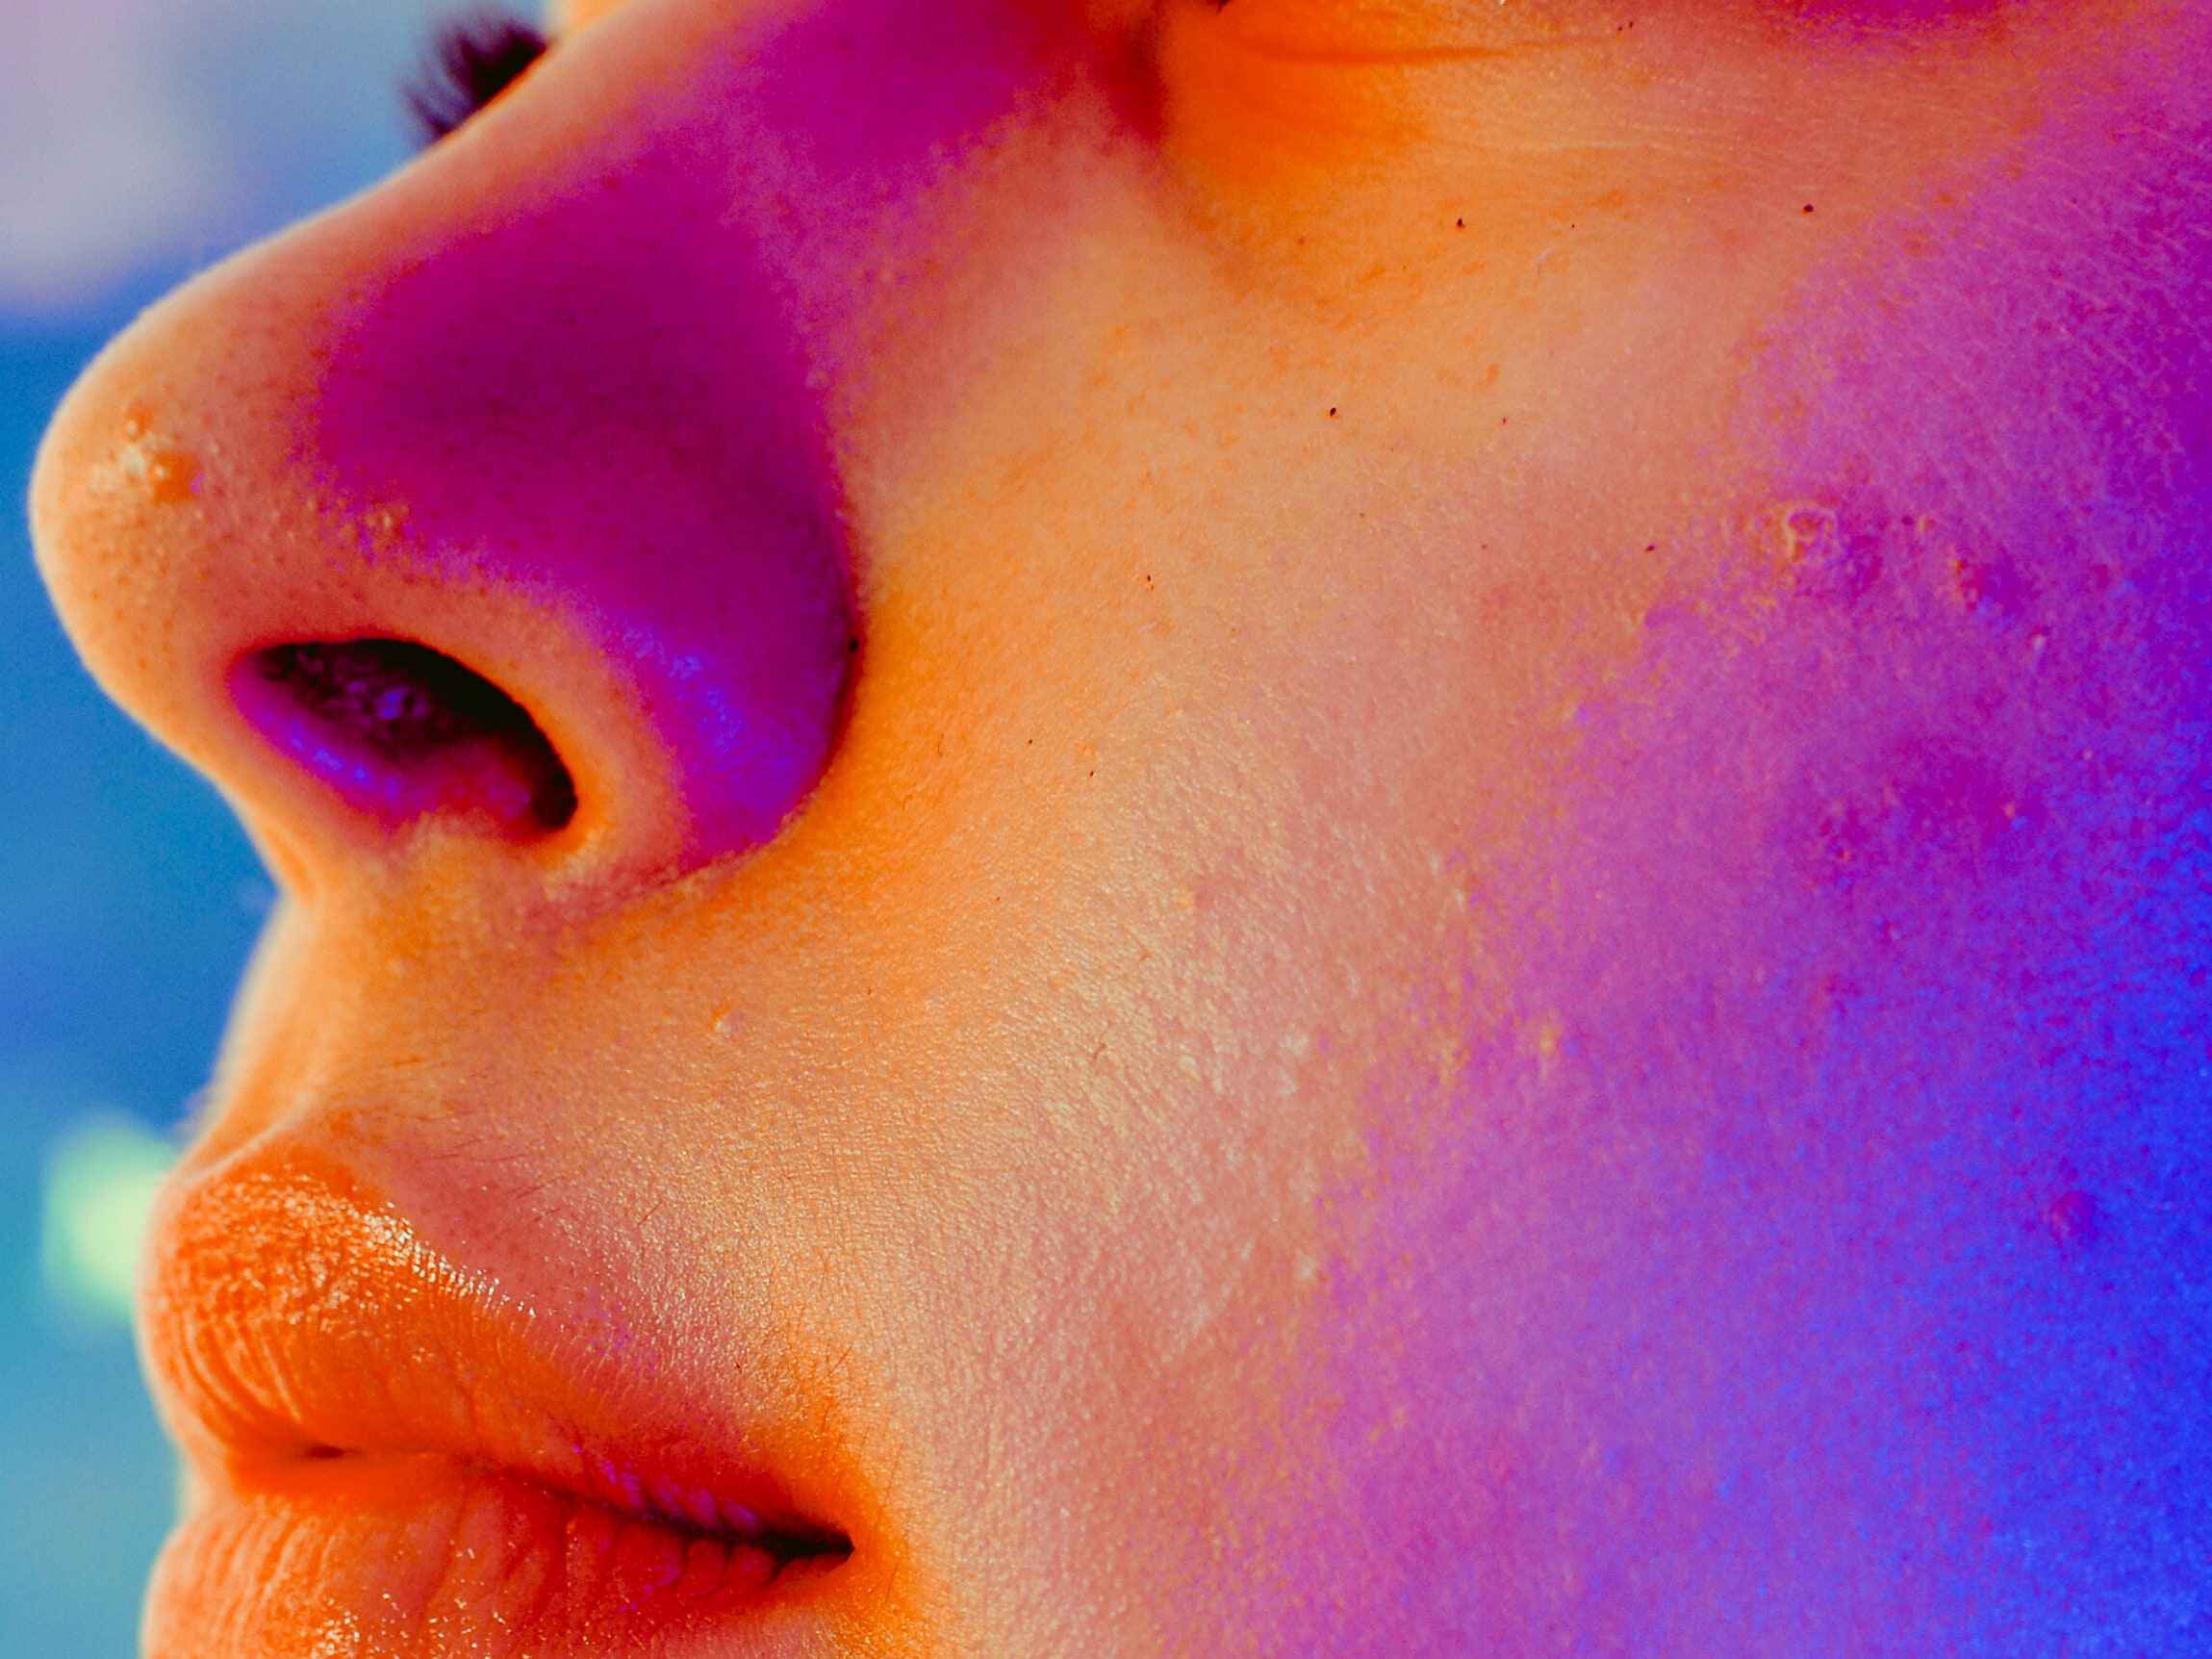 12 Reasons Why You Might Have Small 'Bumps' on Your Face